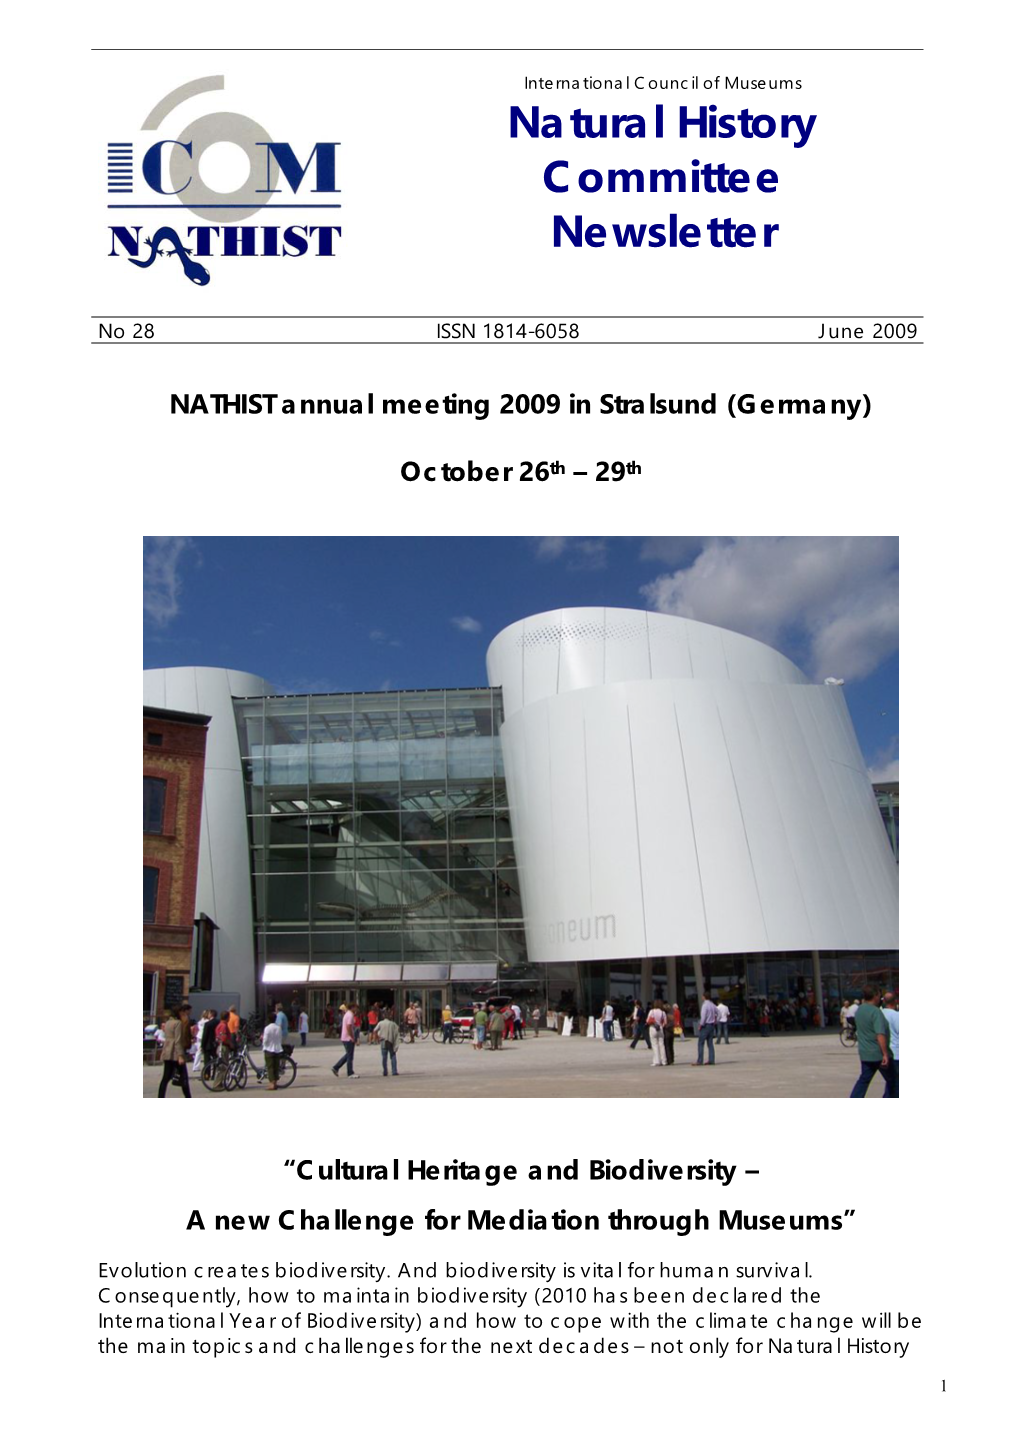 ICOM Natural History Committee Newsletter